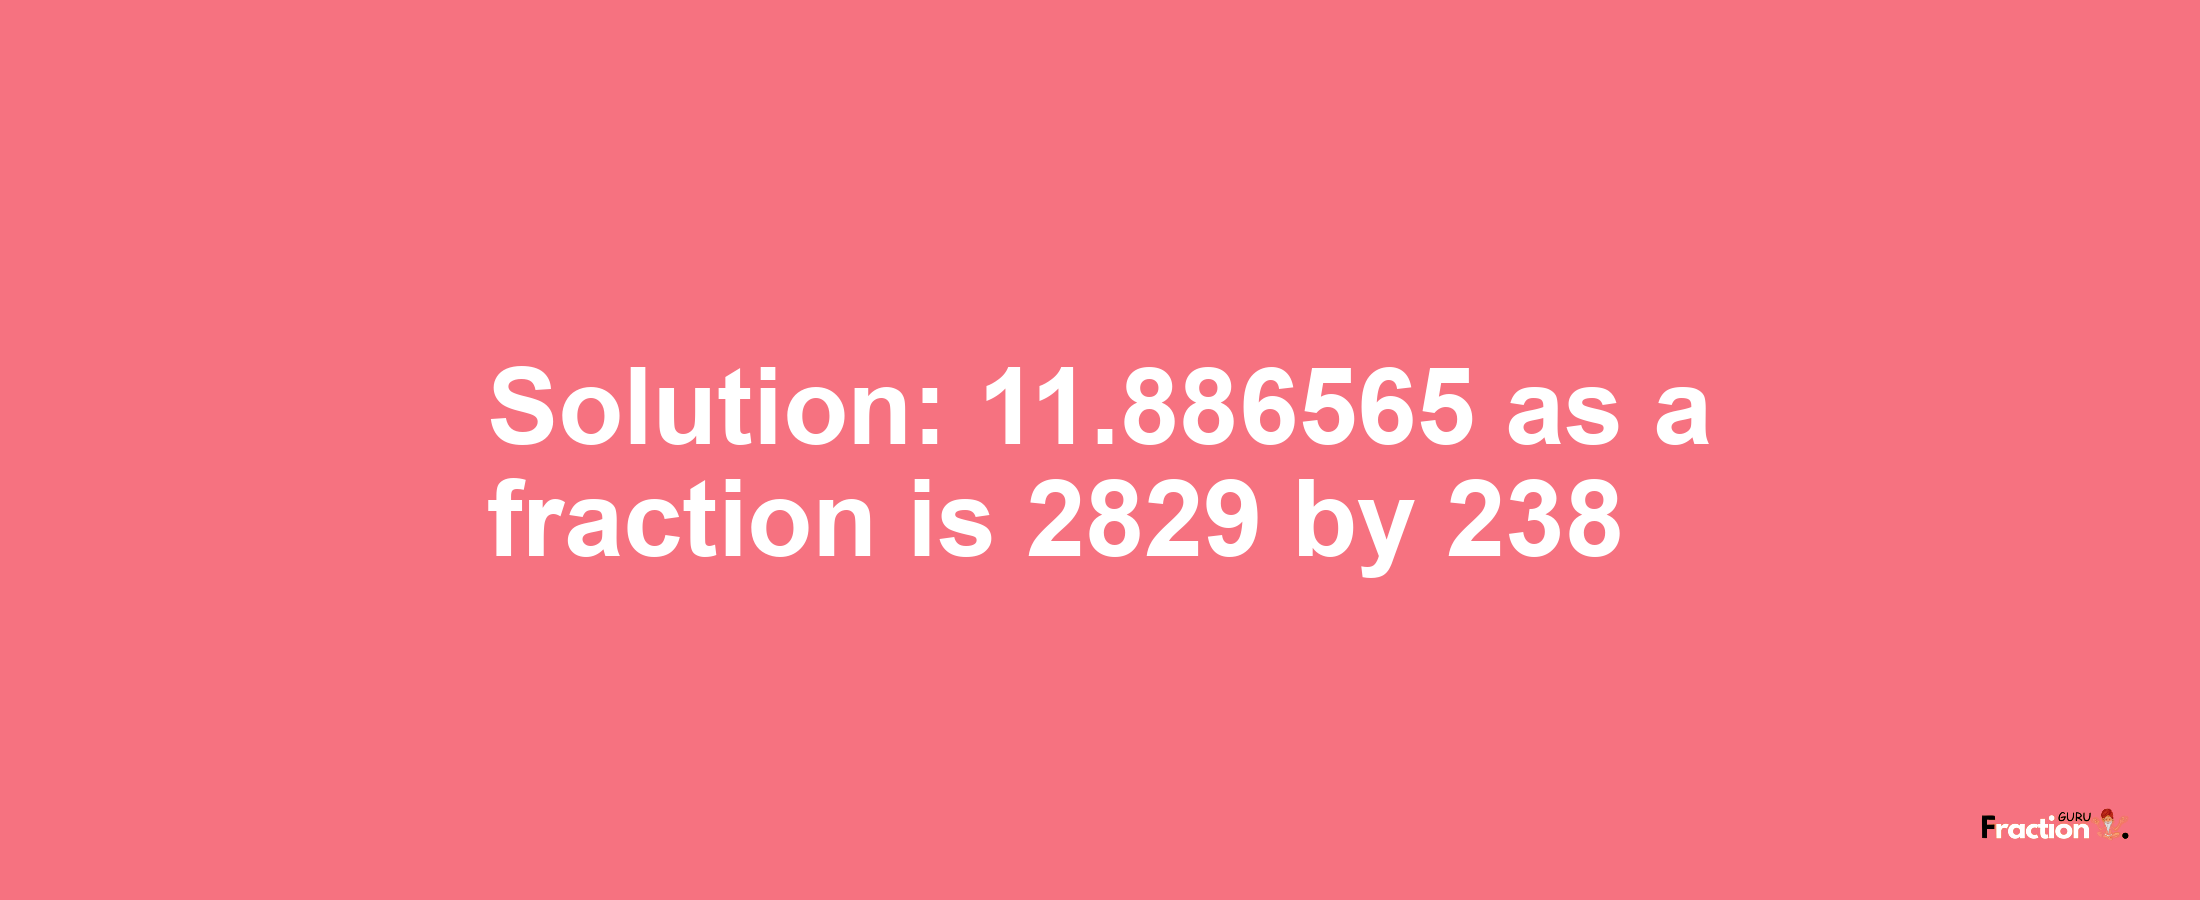 Solution:11.886565 as a fraction is 2829/238